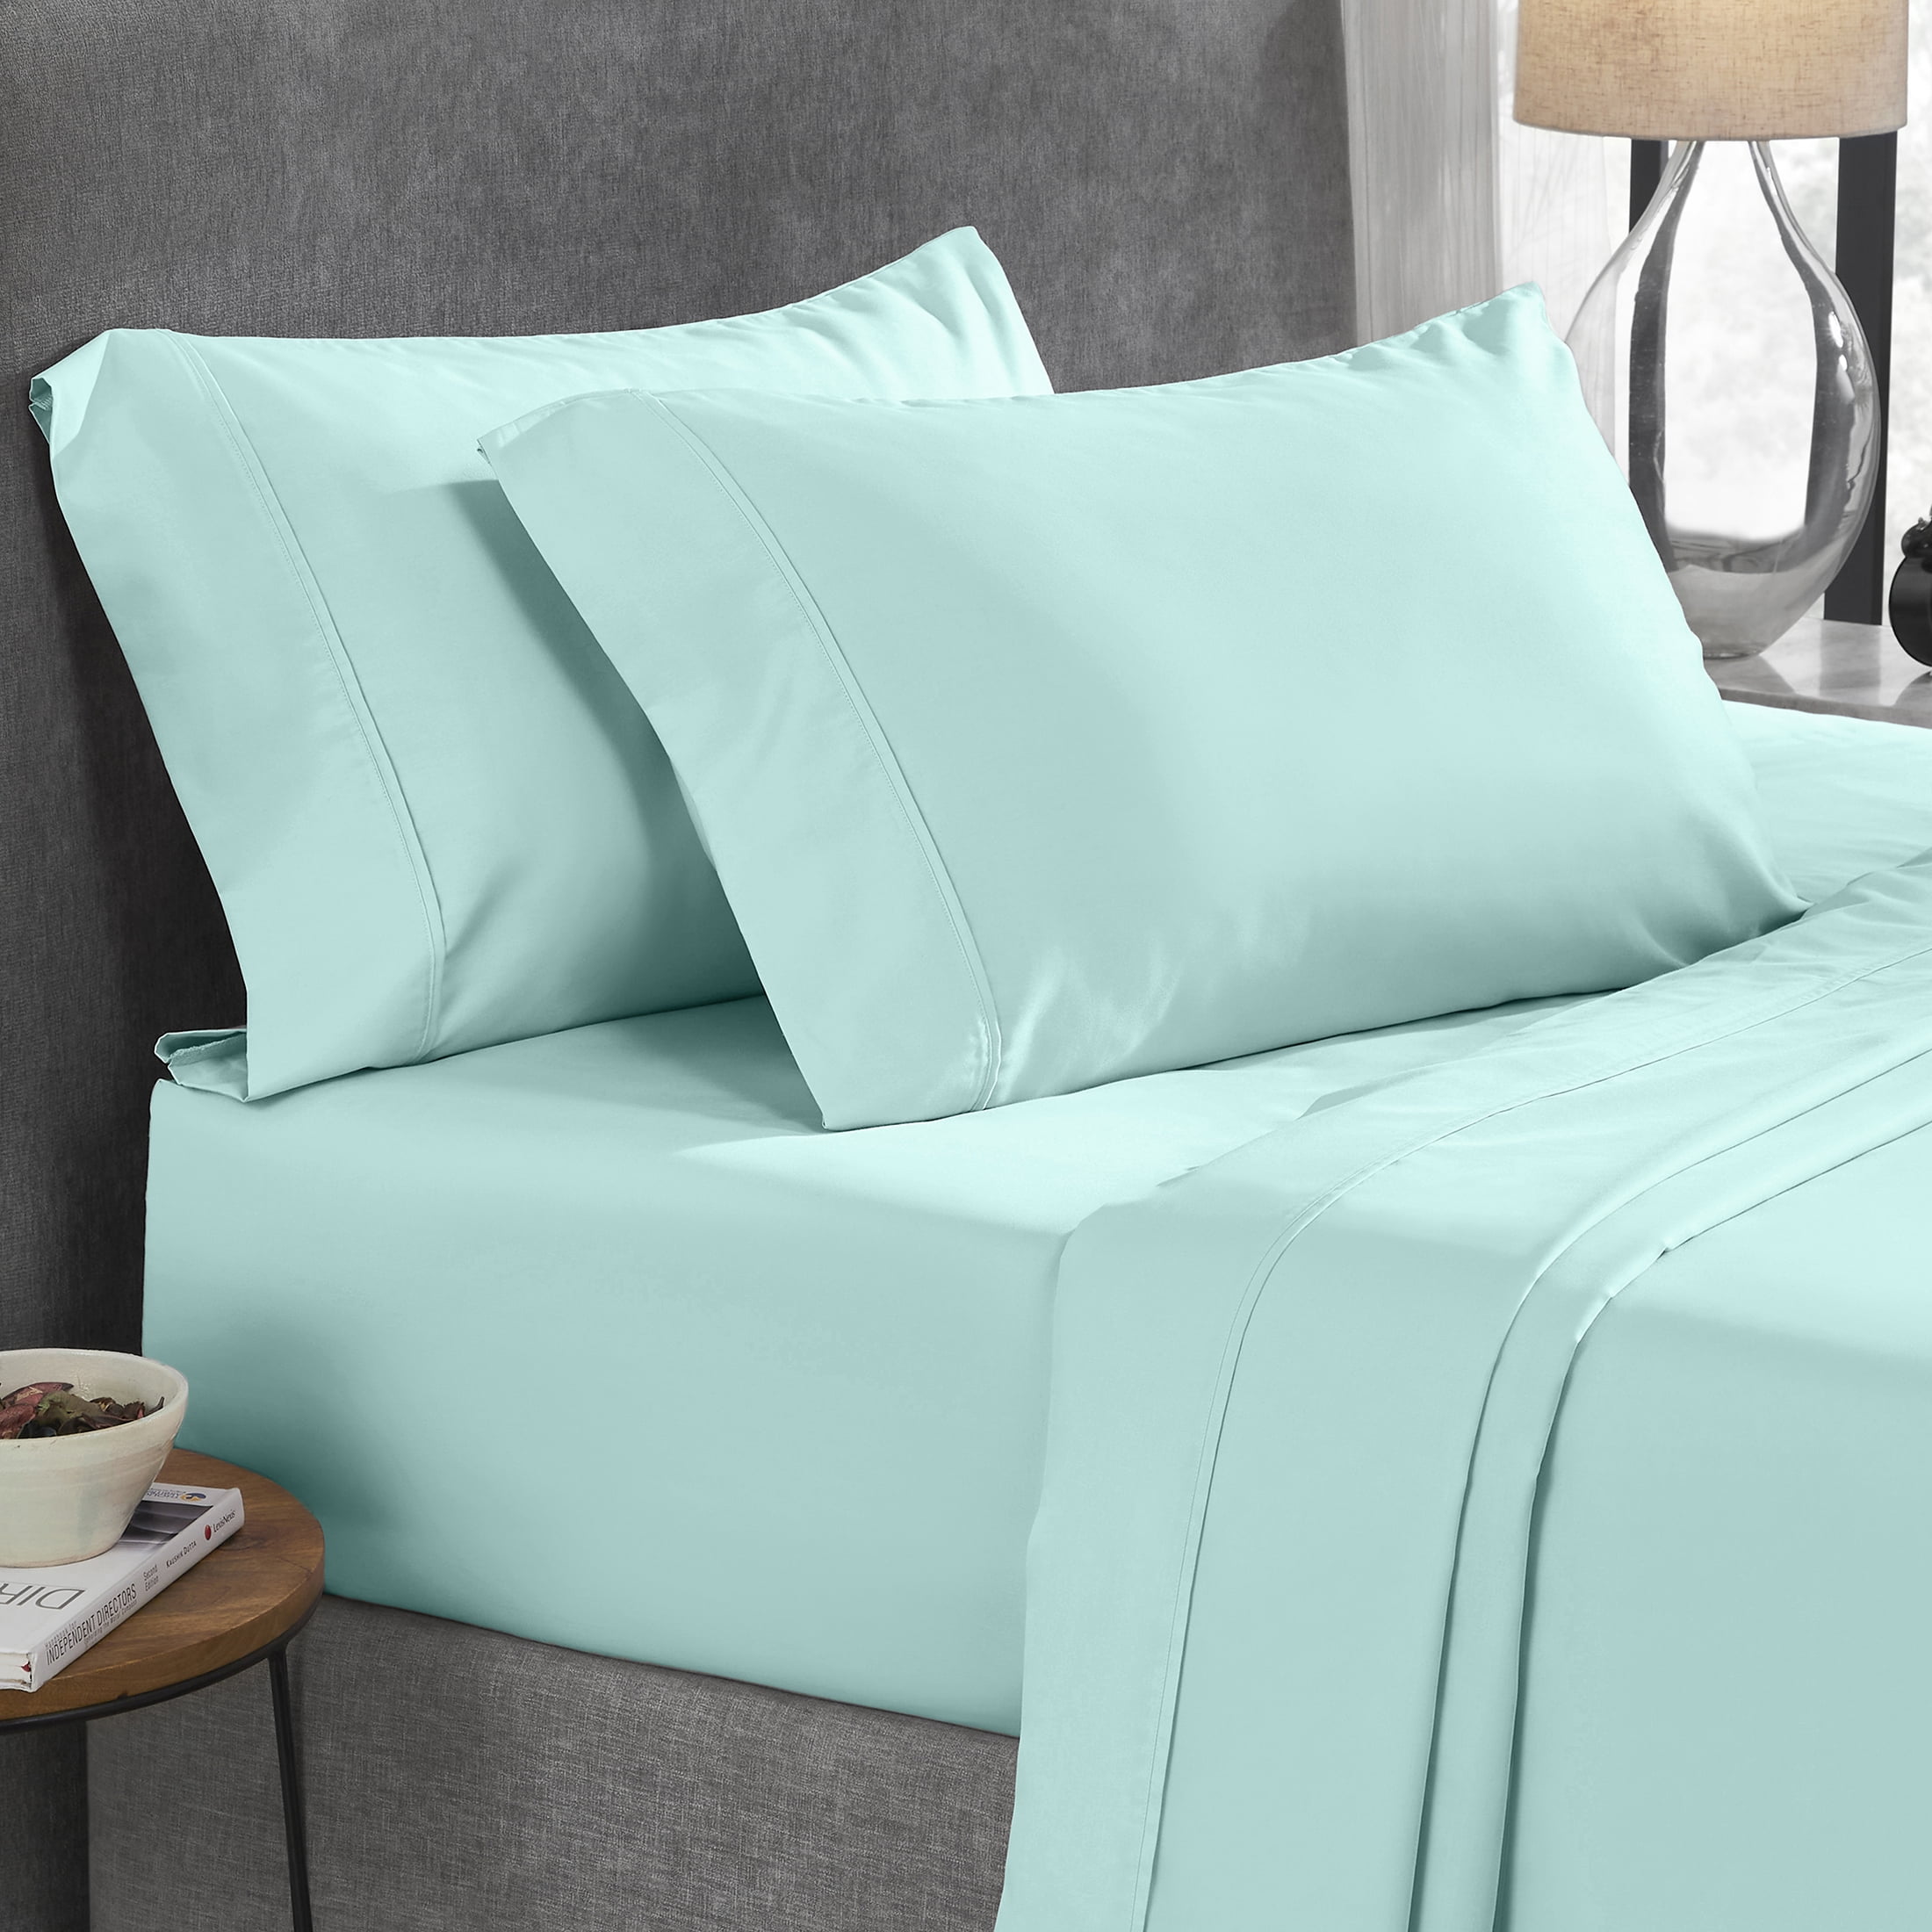 Details about   Tremendous Bedding Fitted Sheet+2 Pillow Case Organic Cotton US Sizes All Color 